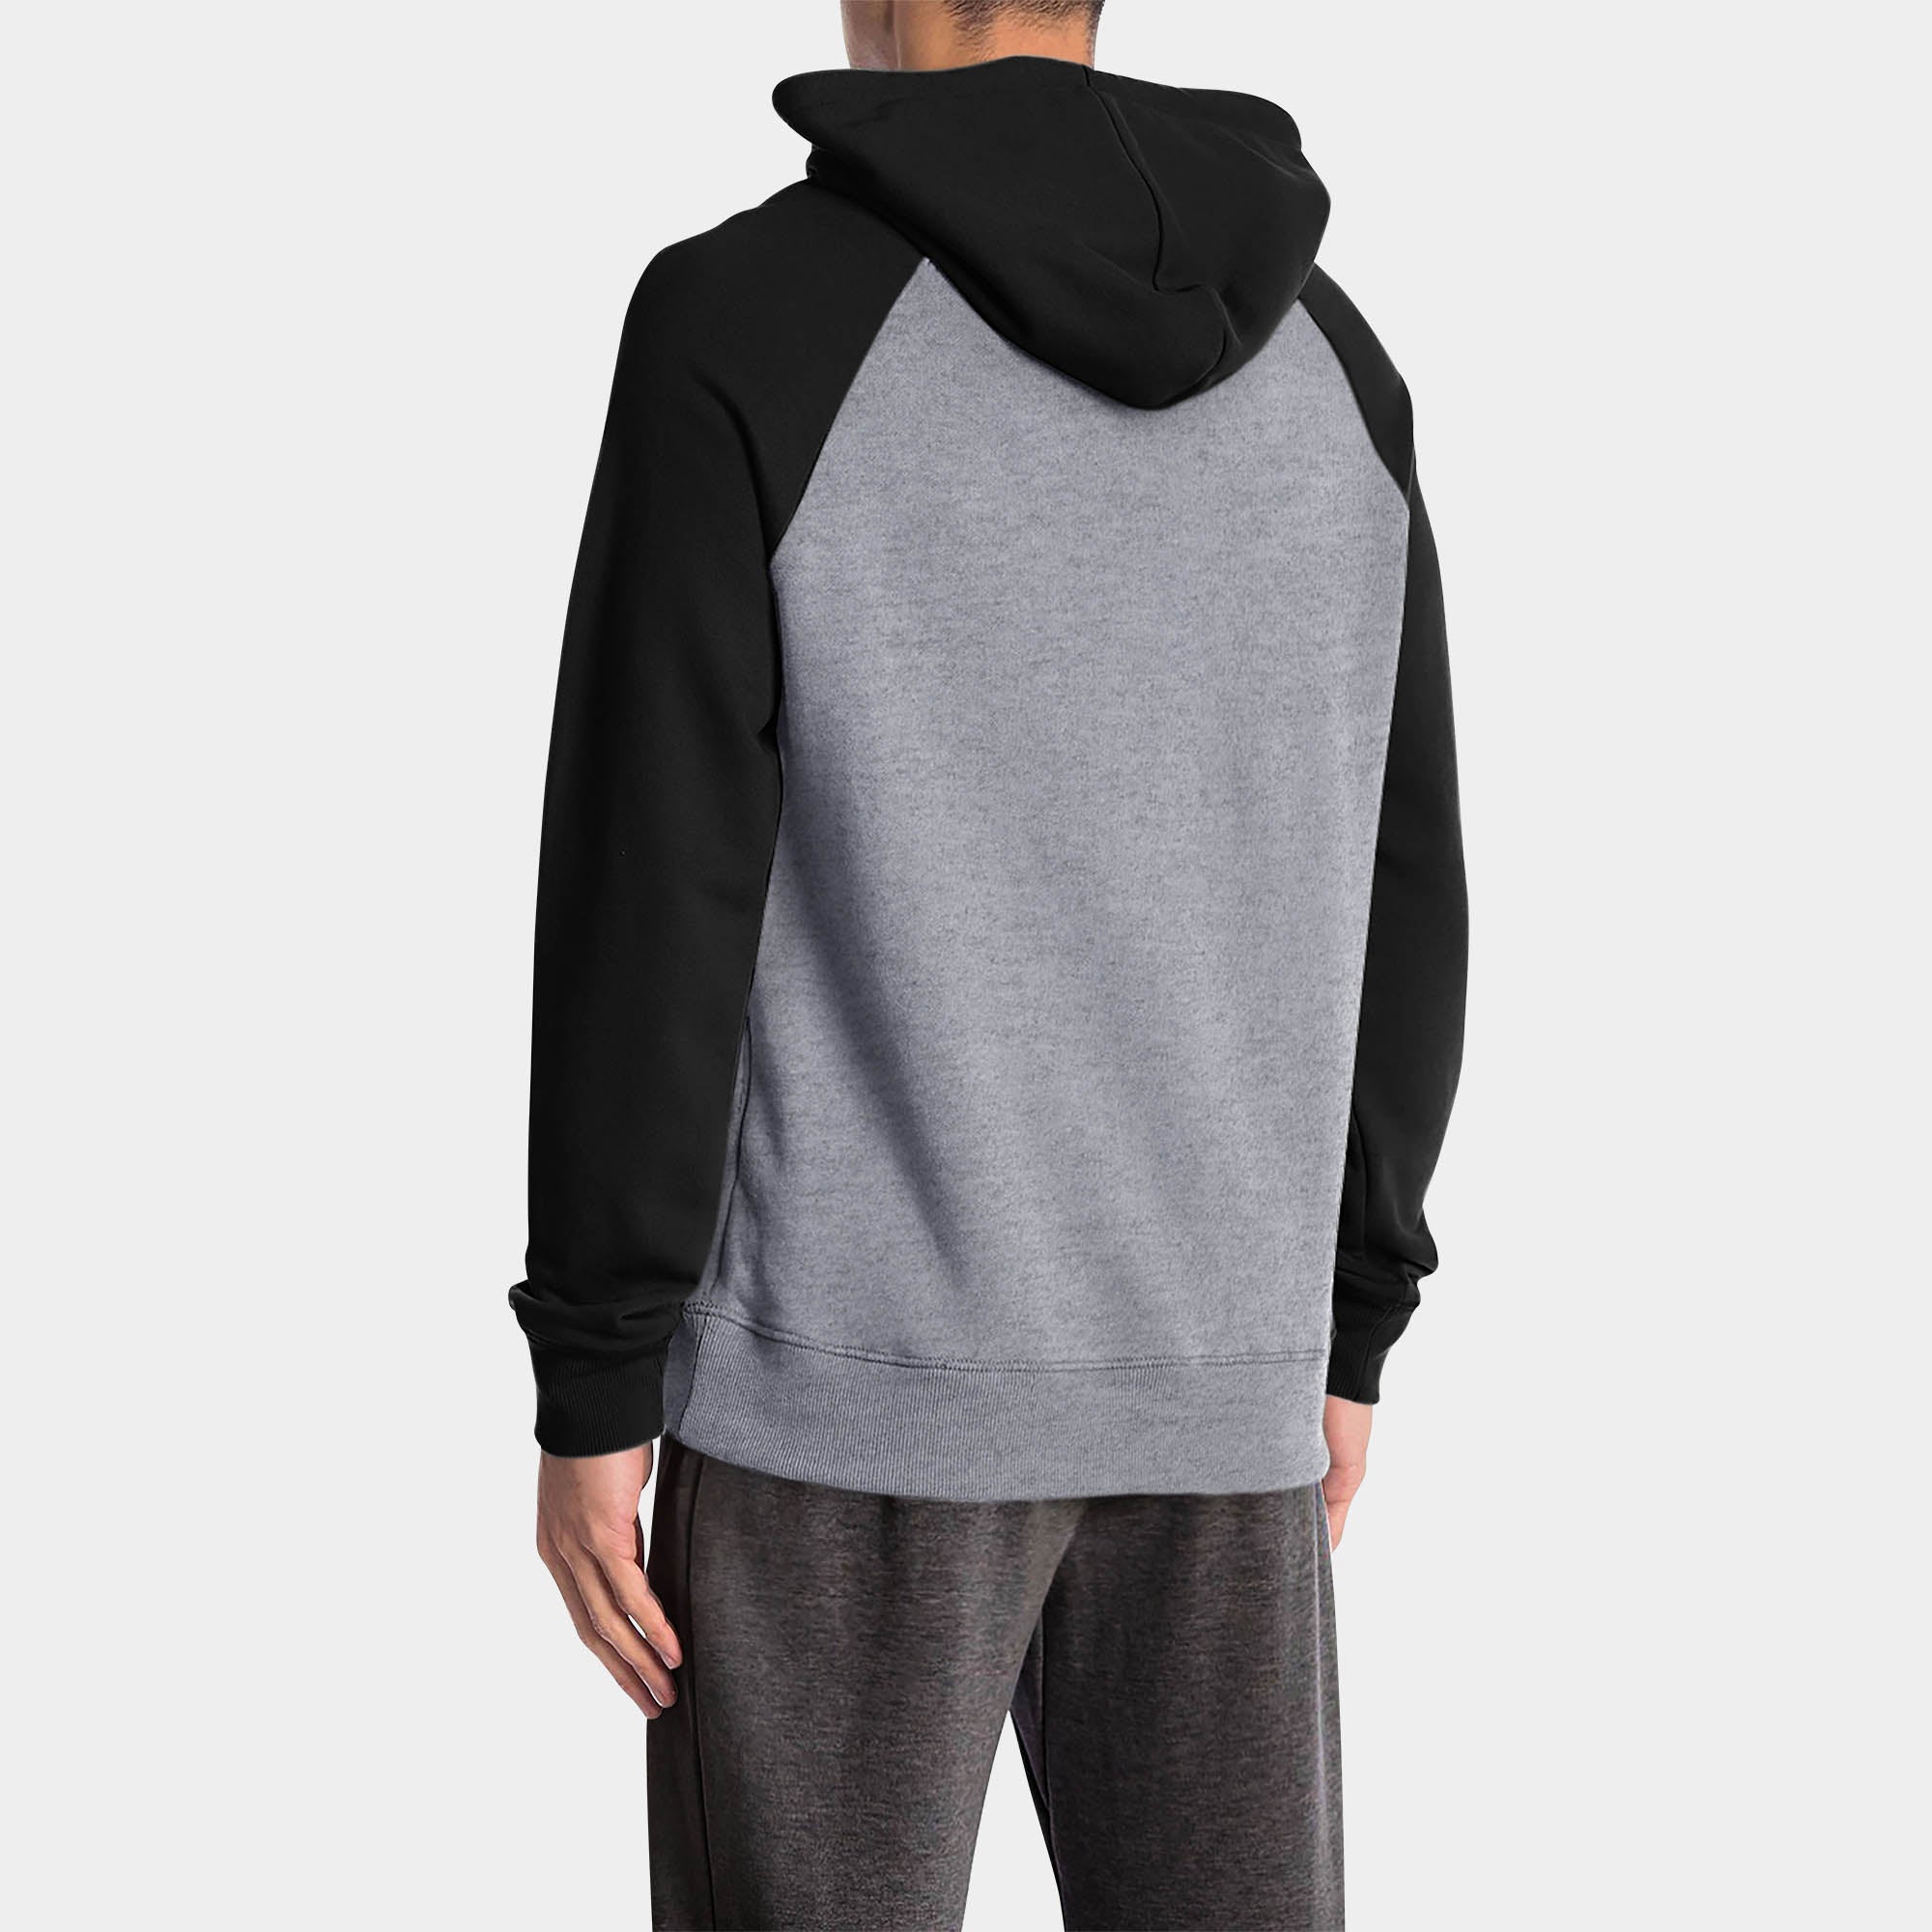 pullover hoodie_mens pullover hoodie_pullover sweatshirt_champion pullover hoodie_pullover adidas_hooded pullover_Heather Gray/Black